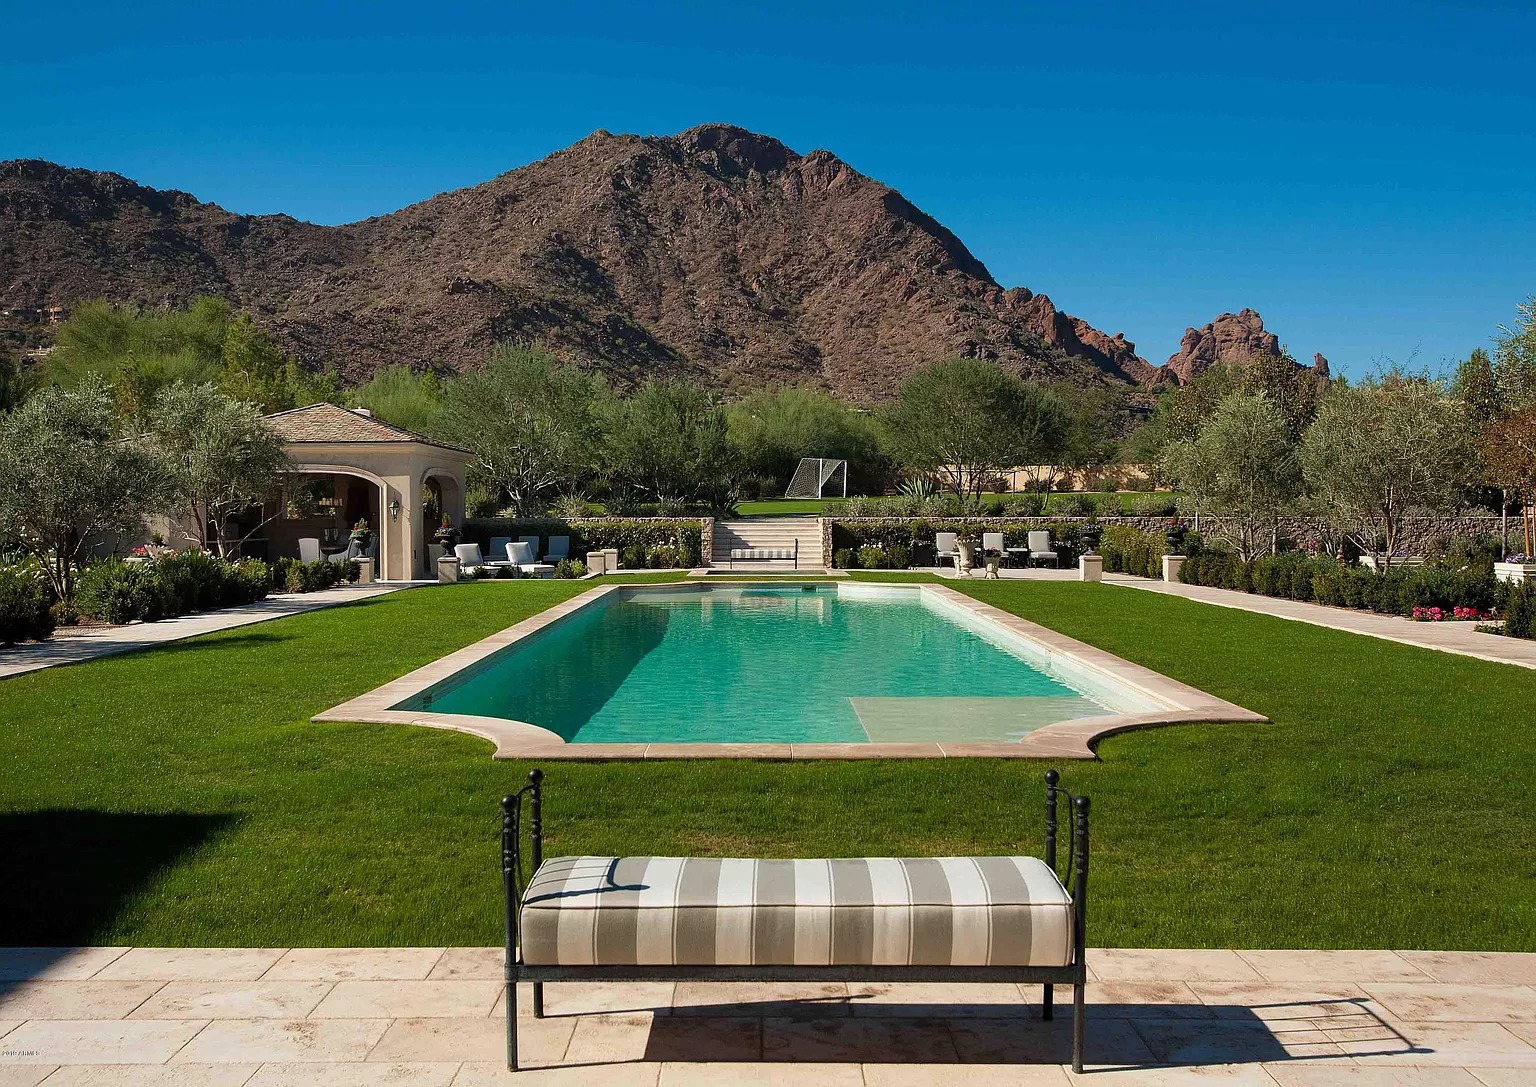 5780 N Saguaro Rd, Paradise Valley, AZ 85253 - $21,000,000 home for sale, house images, photos and pics gallery